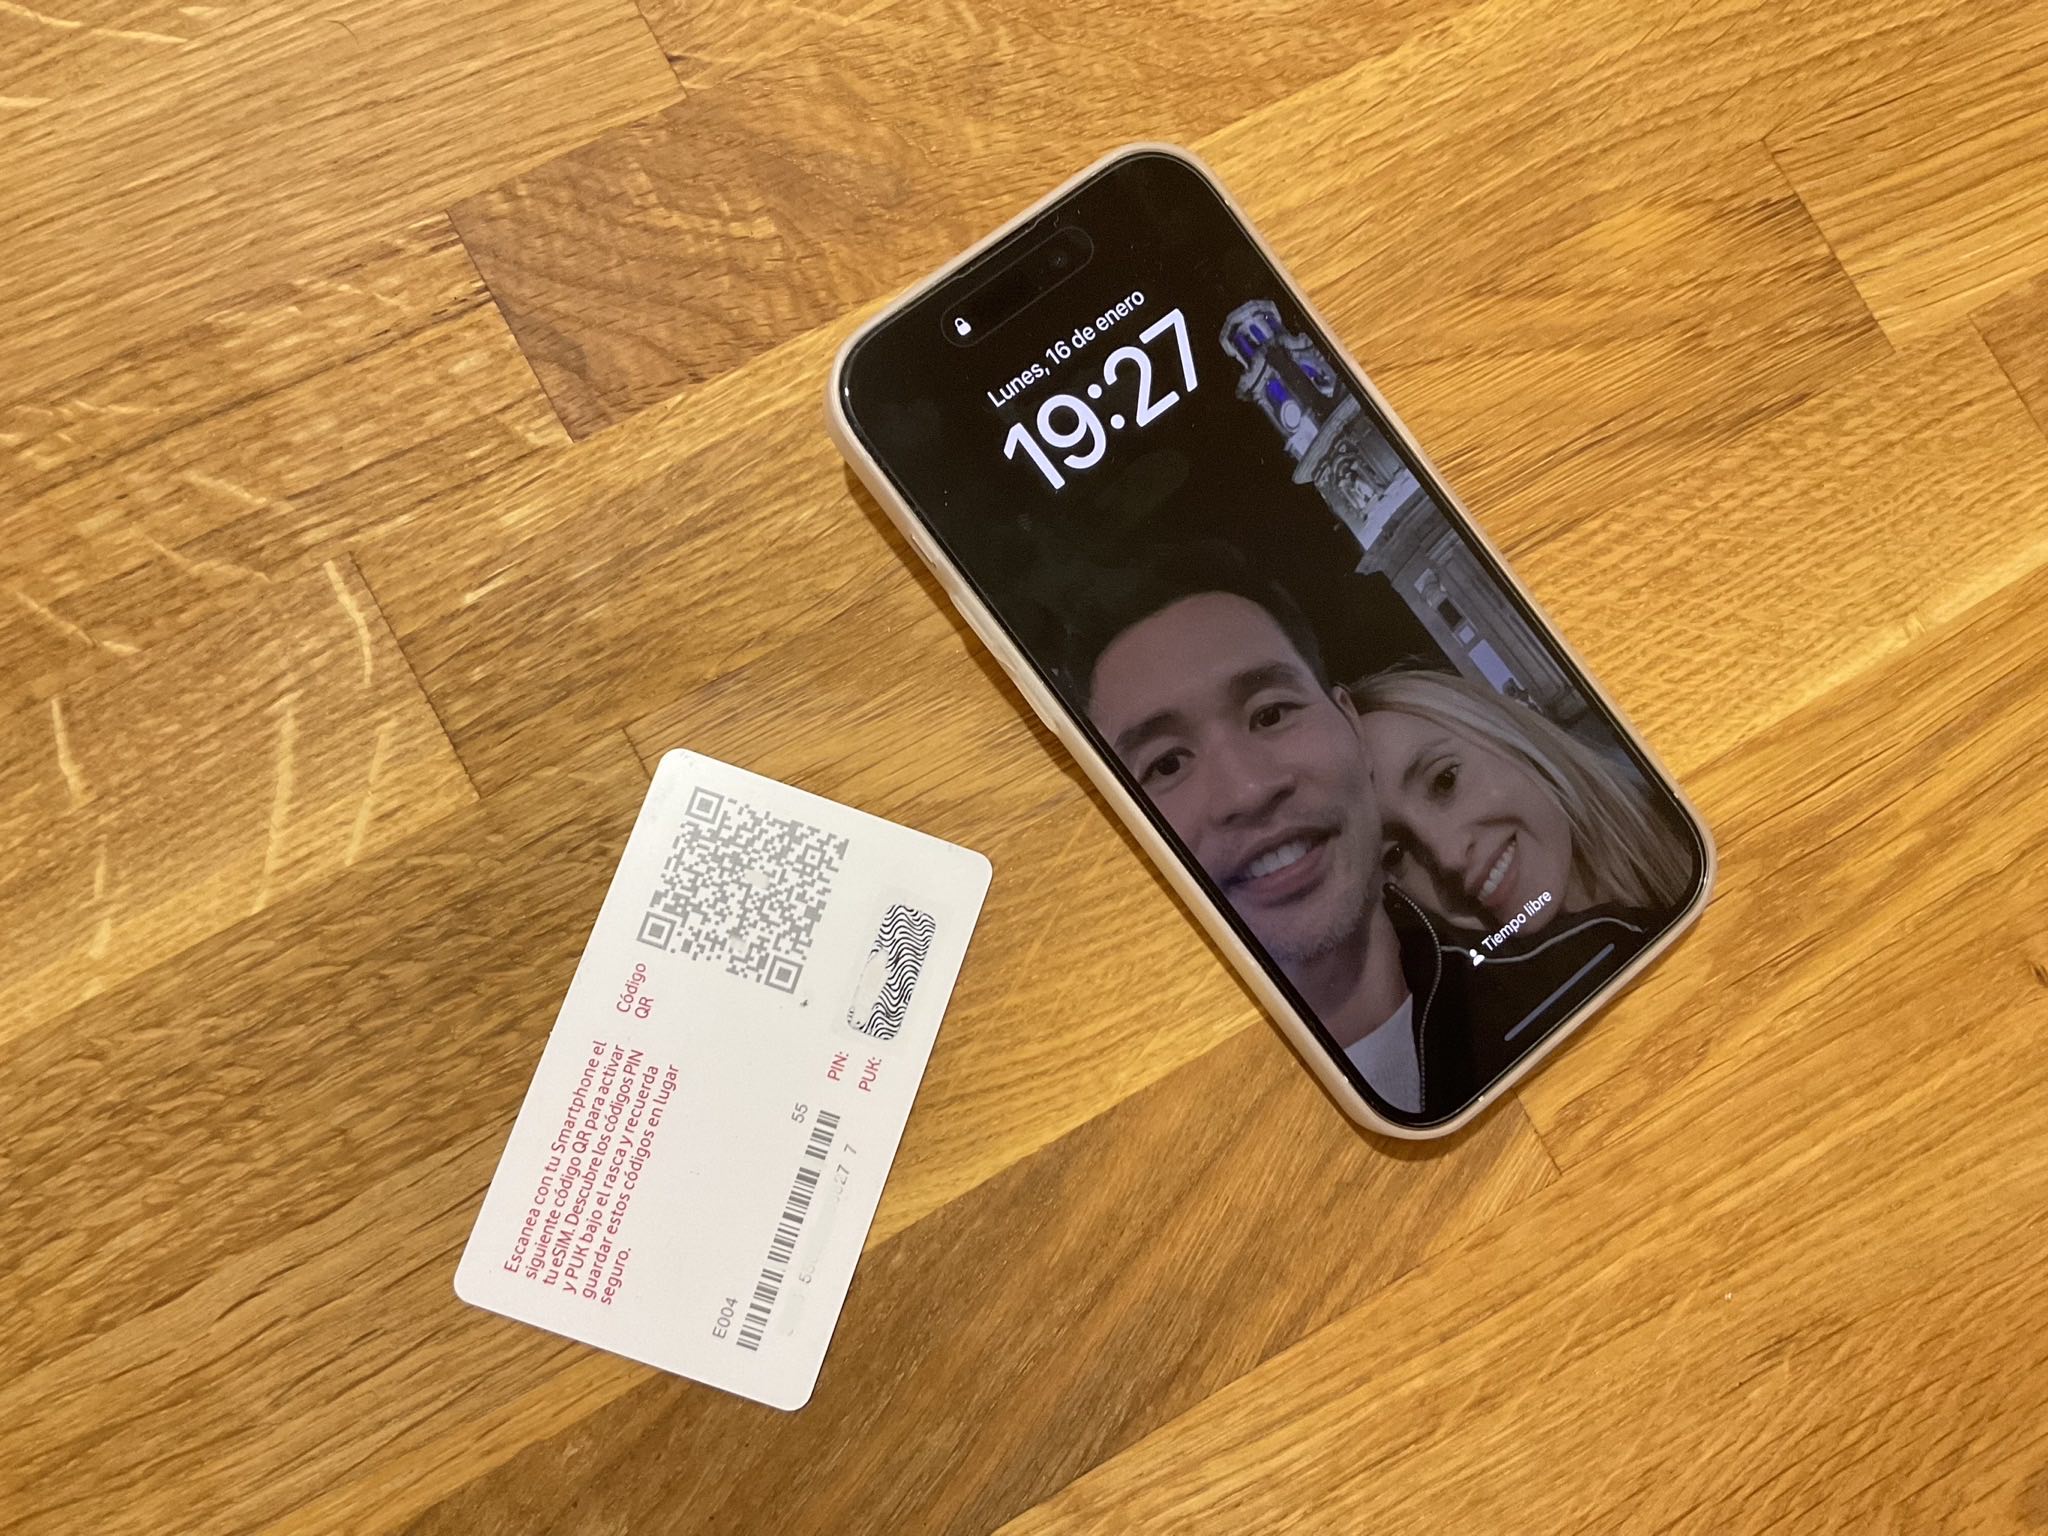 A Vodafone pre-paid eSIM card with QR code and an iPhone 14 Pro.